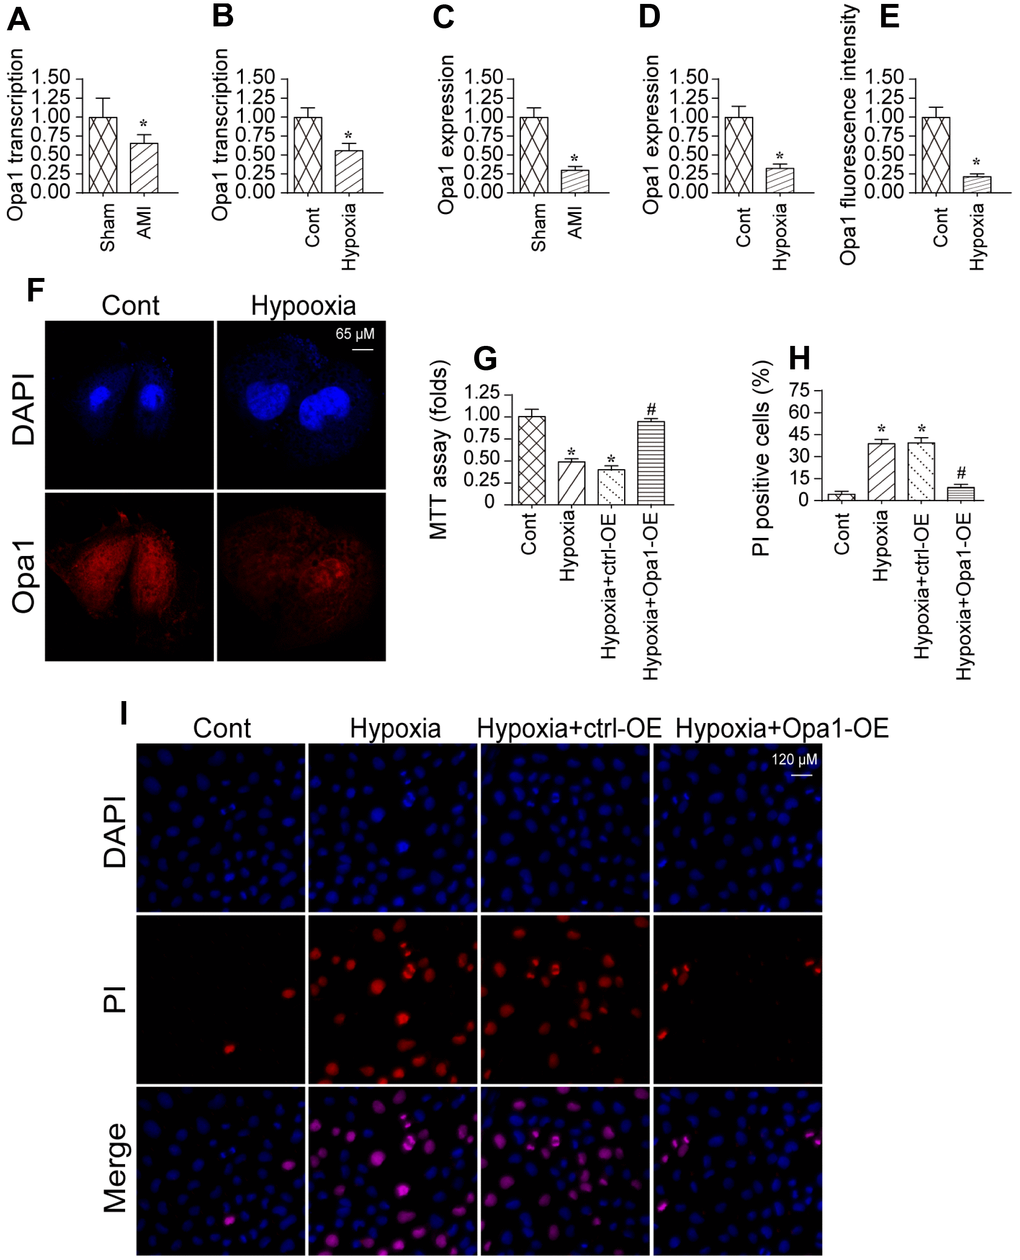 Opa1 is downregulated in the infarcted heart and in hypoxia-treated cardiomyocytes. (A–D) Quantitative real-time PCR and western blot analysis of Opa1 expression. (E, F) Analysis of Opa1 expression in cardiomyocytes in vitro by immunofluorescence. (G) MTT assays of cardiomyocyte viability. (H, I) Analysis of cardiomyocyte apoptosis by PI staining. *P 